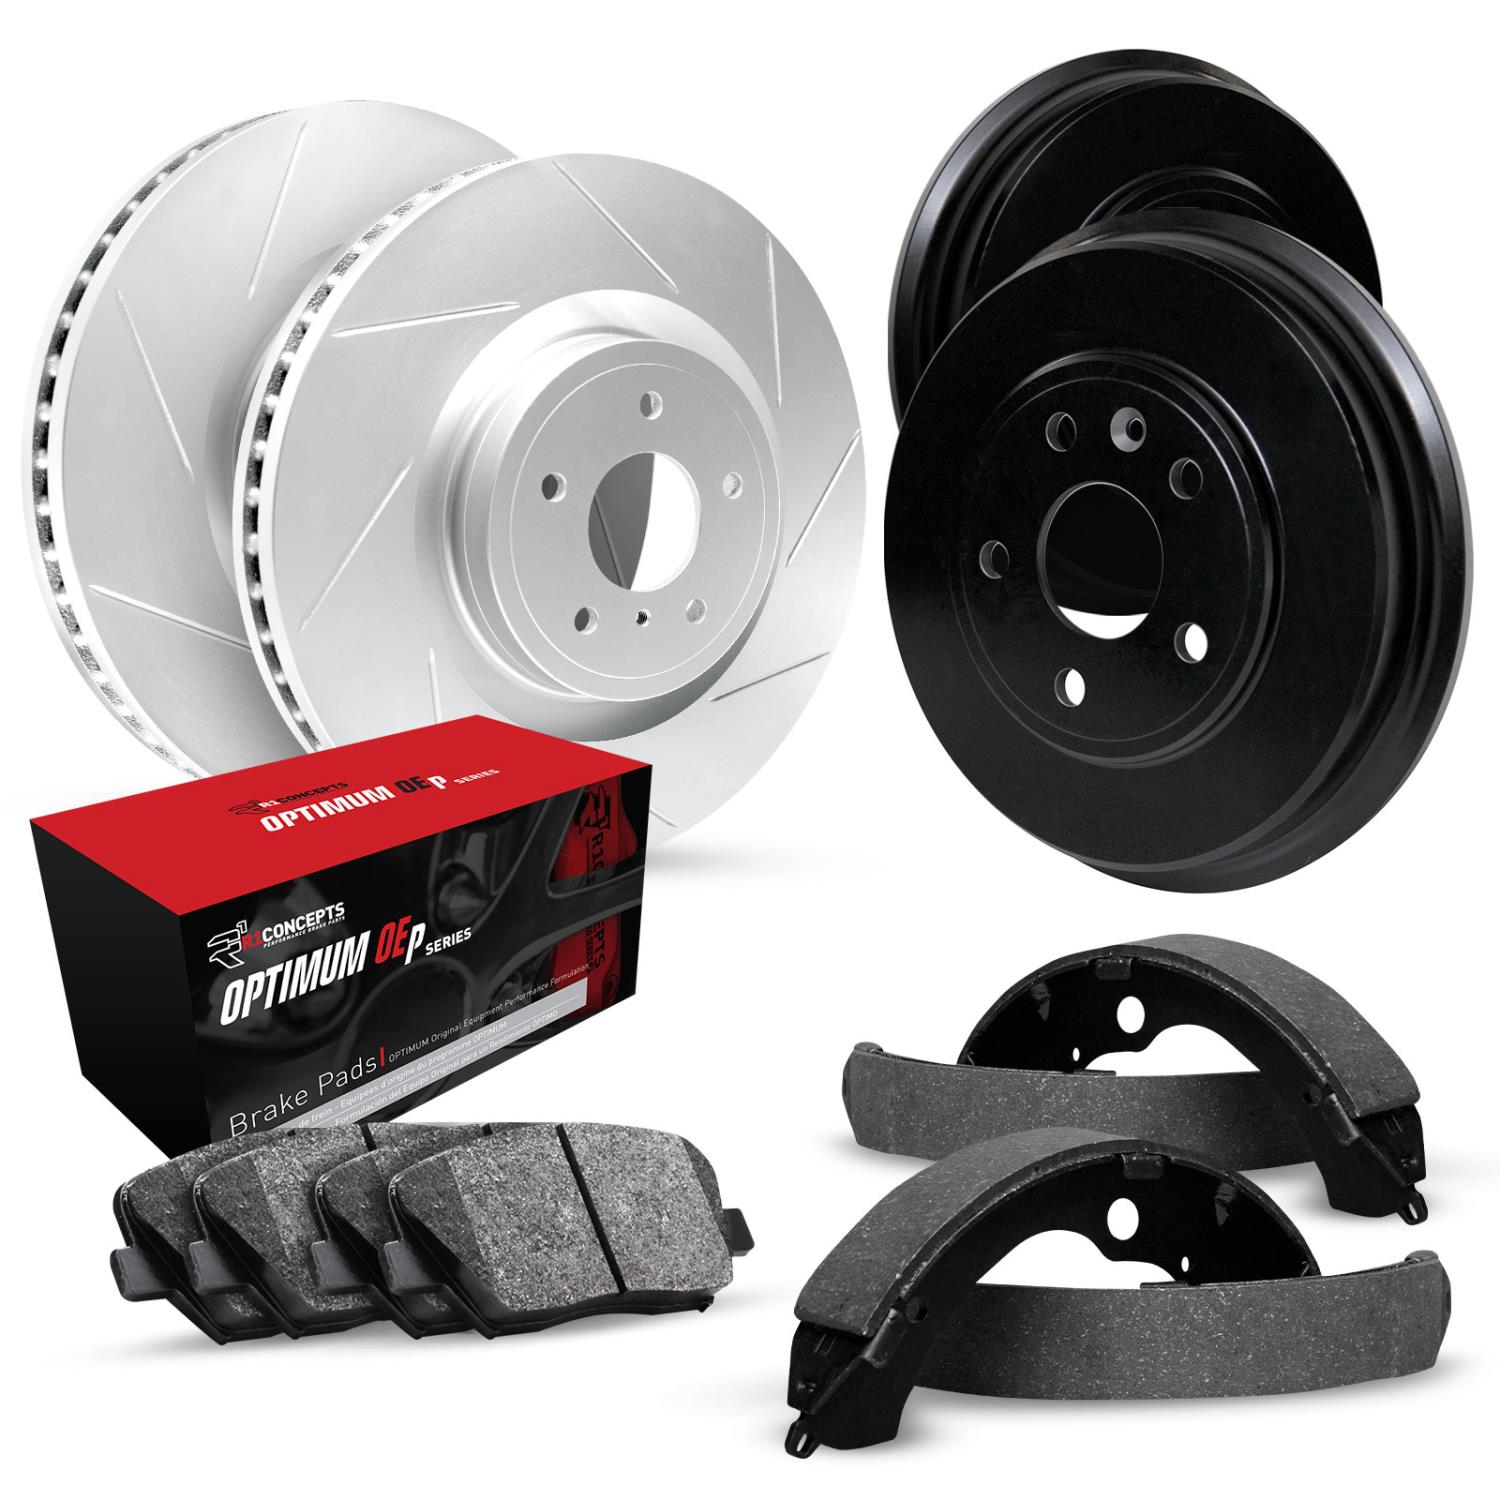 GEO-Carbon Slotted Brake Rotor & Drum Set w/Optimum OE Pads & Shoes, 2011-2019 Ford/Lincoln/Mercury/Mazda